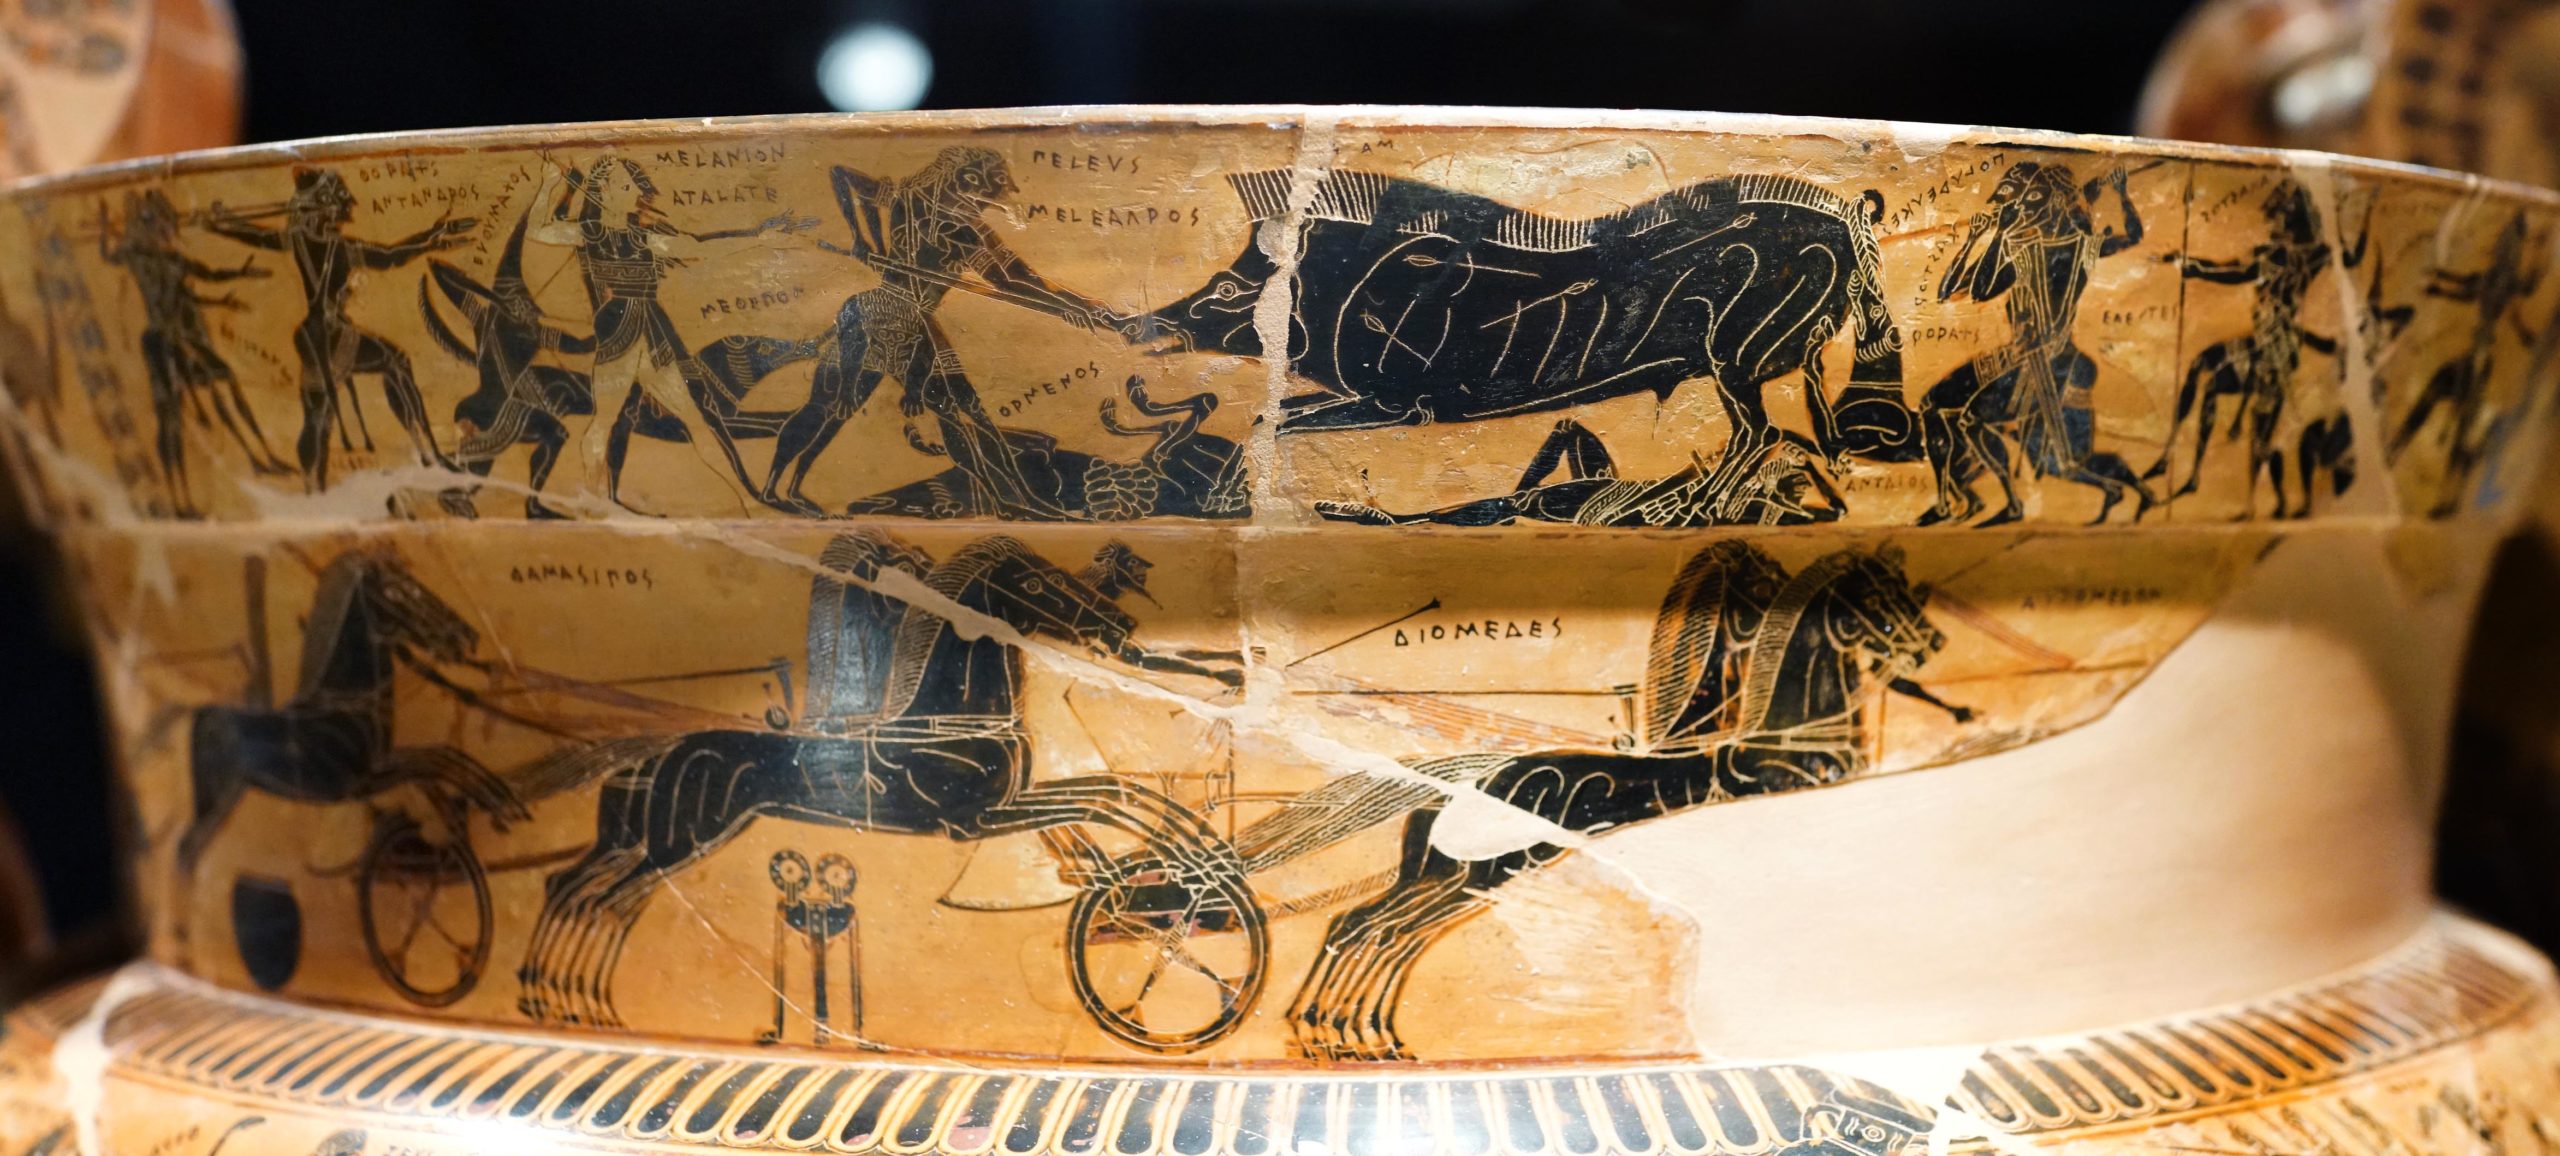 Calydonian Boar Hunt and chariot race below. Kleitias (painter) and Ergotimos (potter), François Vase (volute-krater), mid 6th century B.C.E., Attic black-figure (made in Athens), 66 cm (Museo Archeologico, Florence)